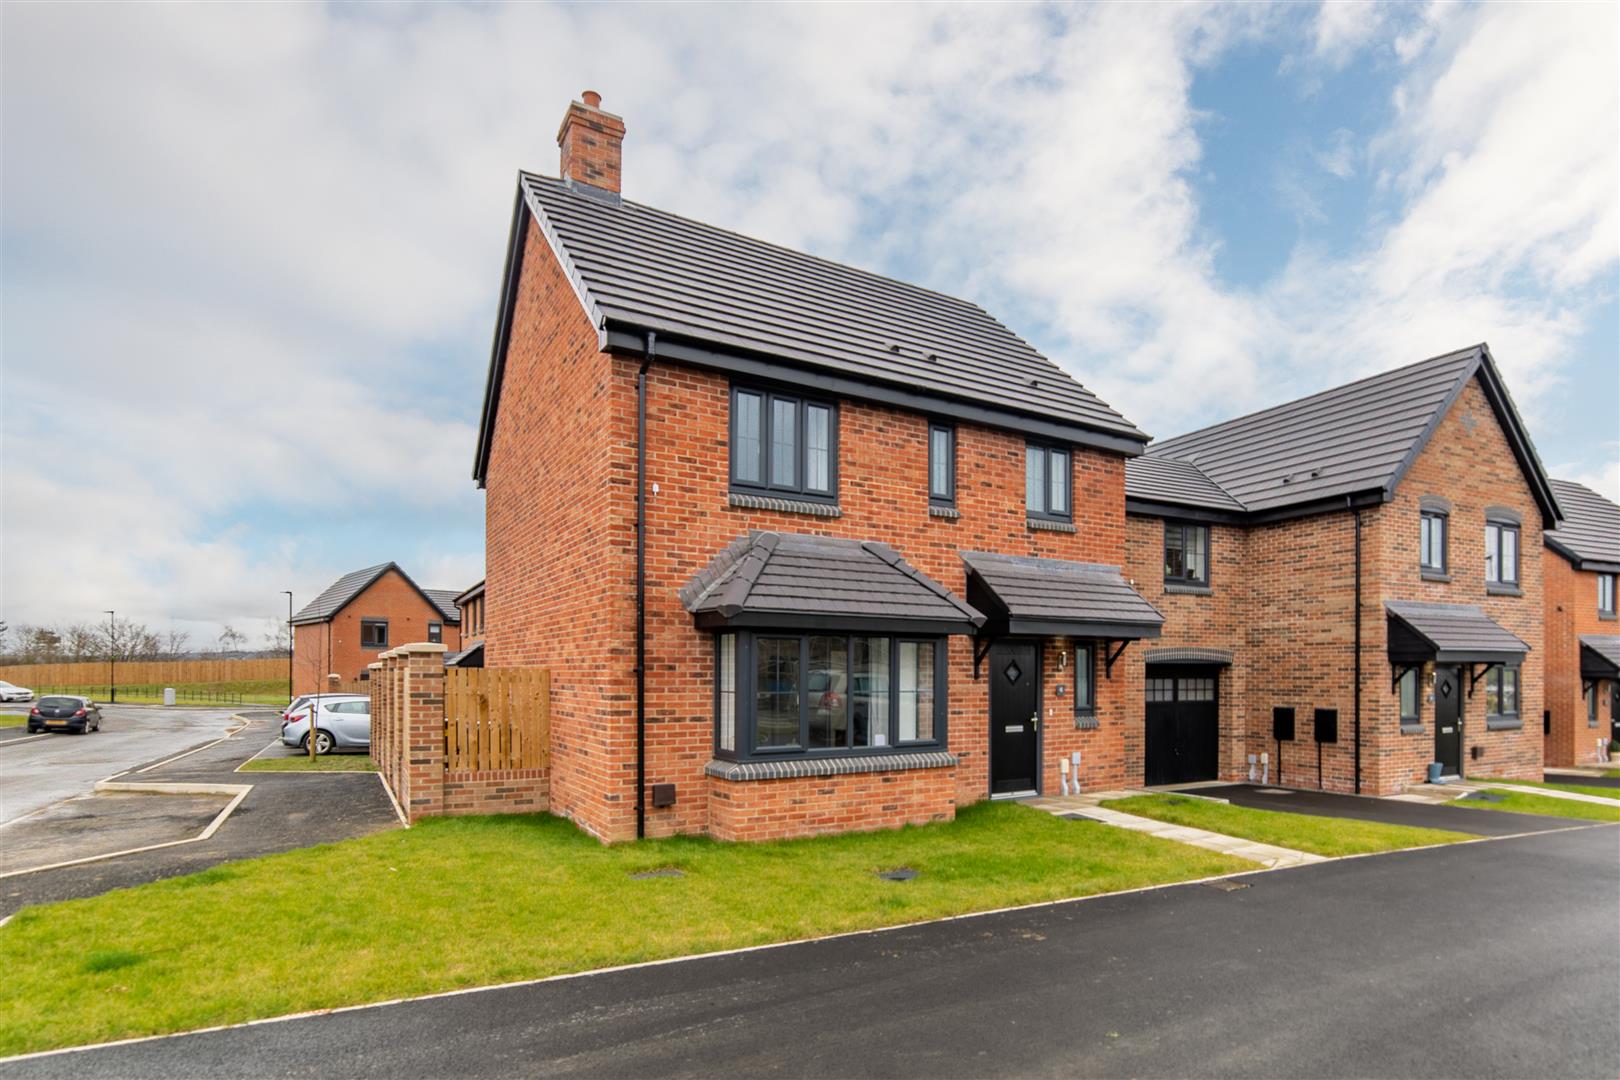 3 bed detached house for sale in Osprey Avenue, Lower Callerton, NE15